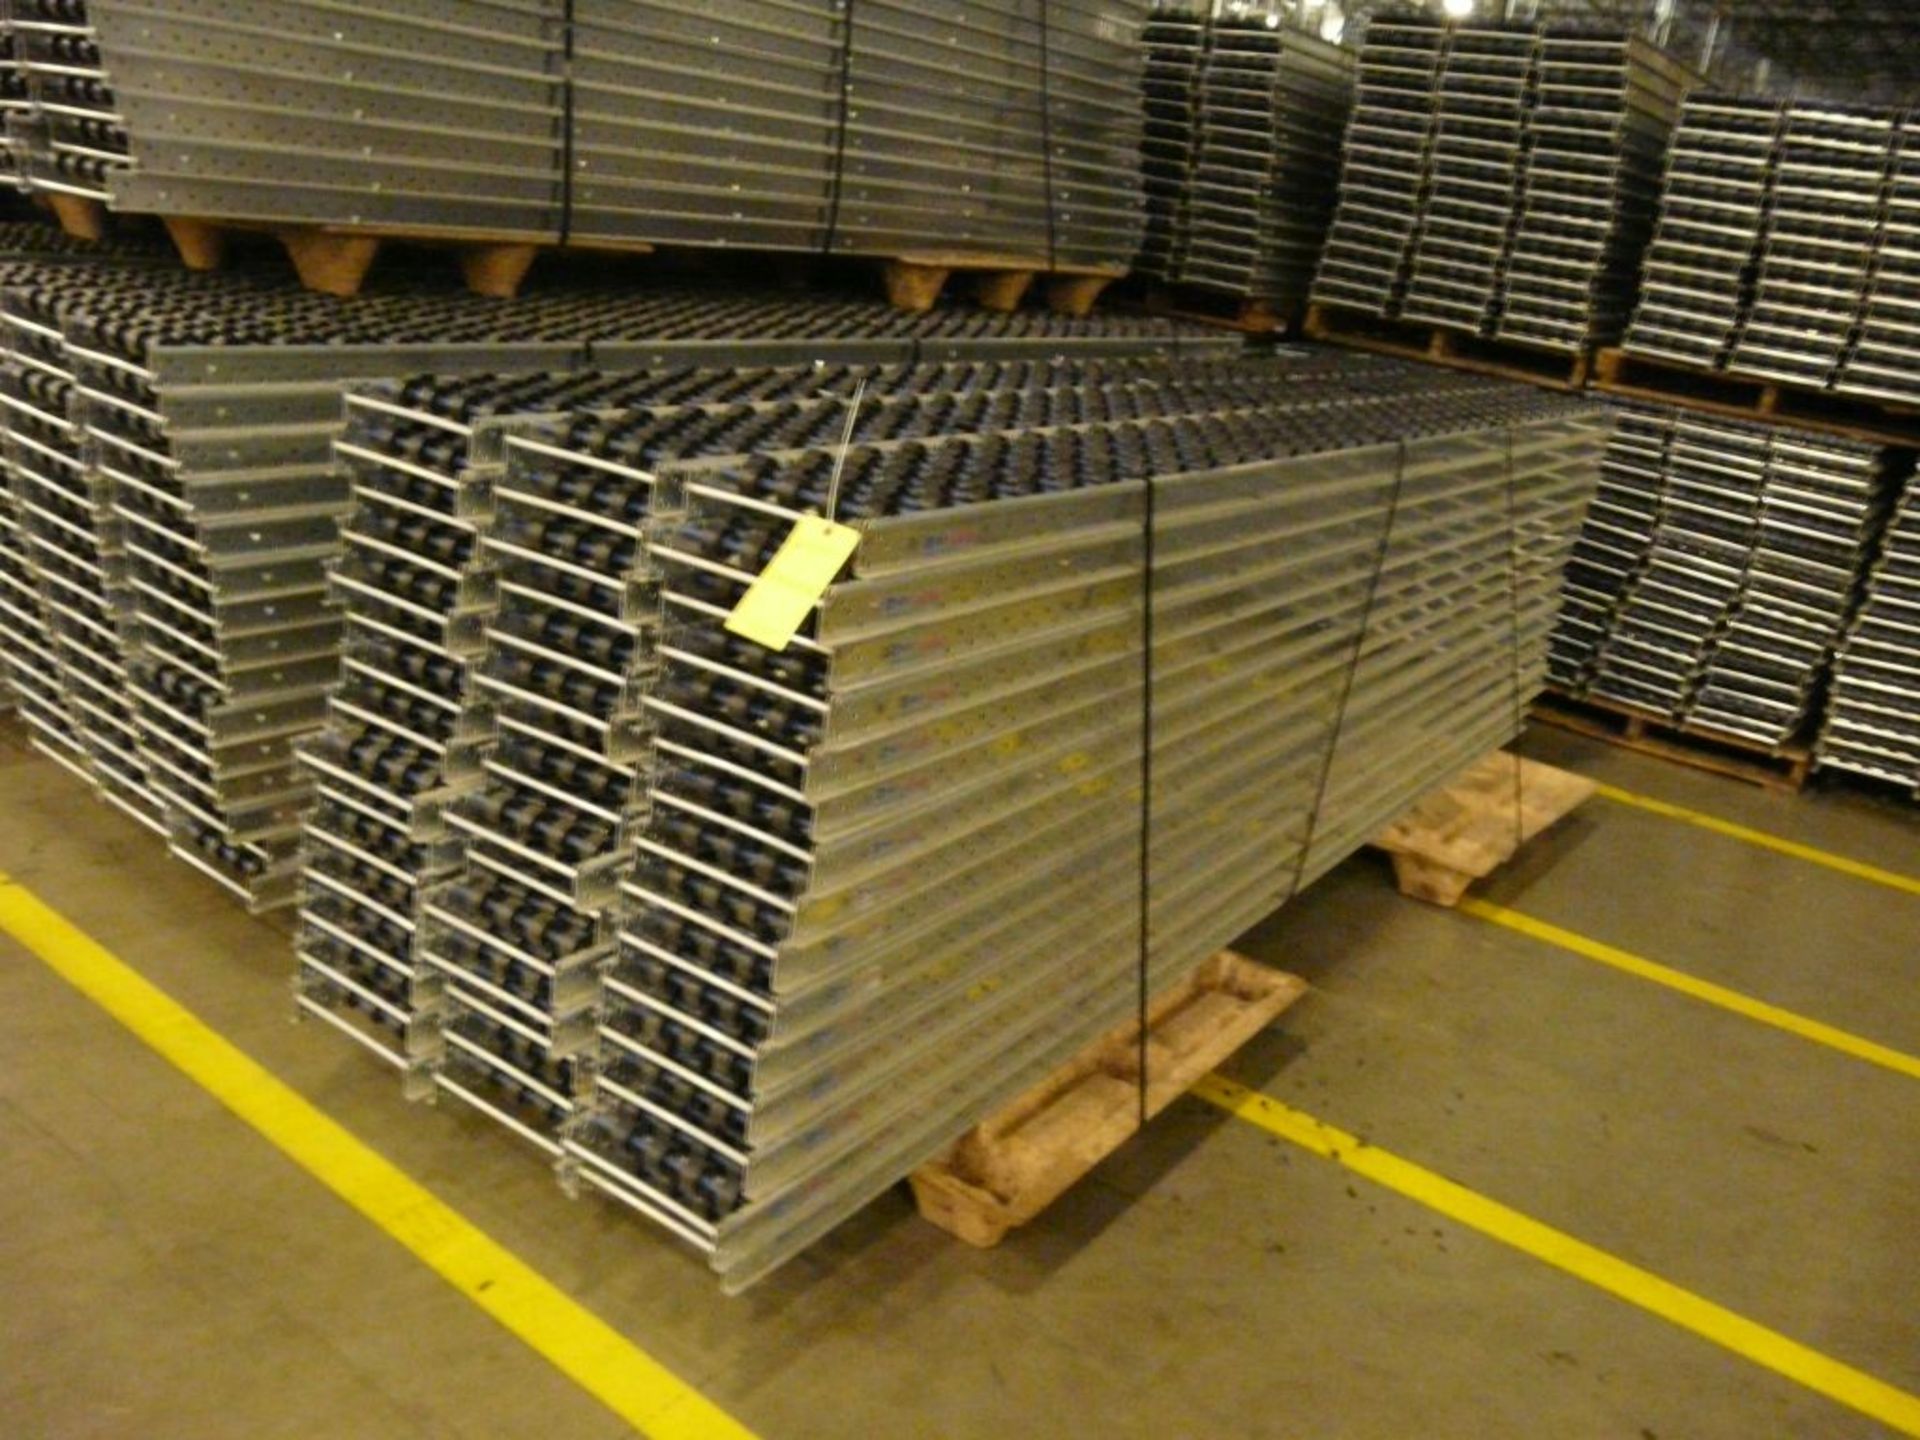 Lot of (90) SpanTrack Wheelbed Carton Flow Conveyors - 11.5'L x 11"W; Tag: 224229 - $30 Lot